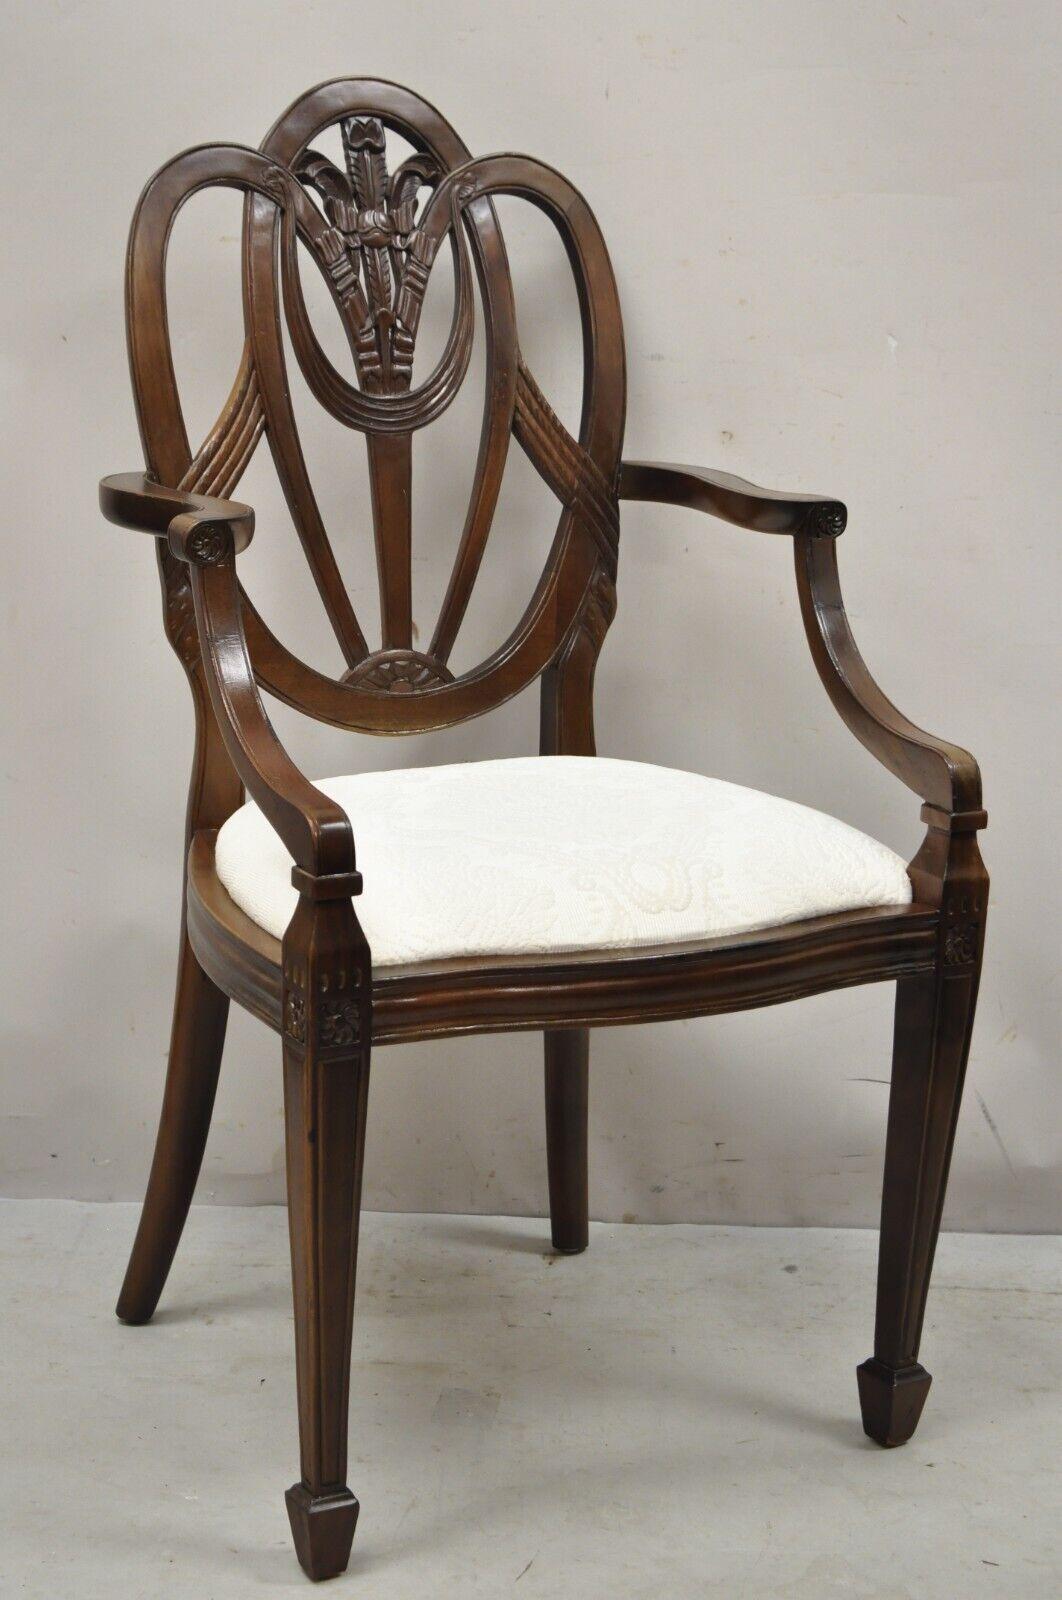 Mahogany Hepplewhite style prince of wales plume carved dining arm chair. Item features a plume carved back splat, solid wood frame, tapered legs, great style and form. Circa Late 20th Century. Measurements: 39.5